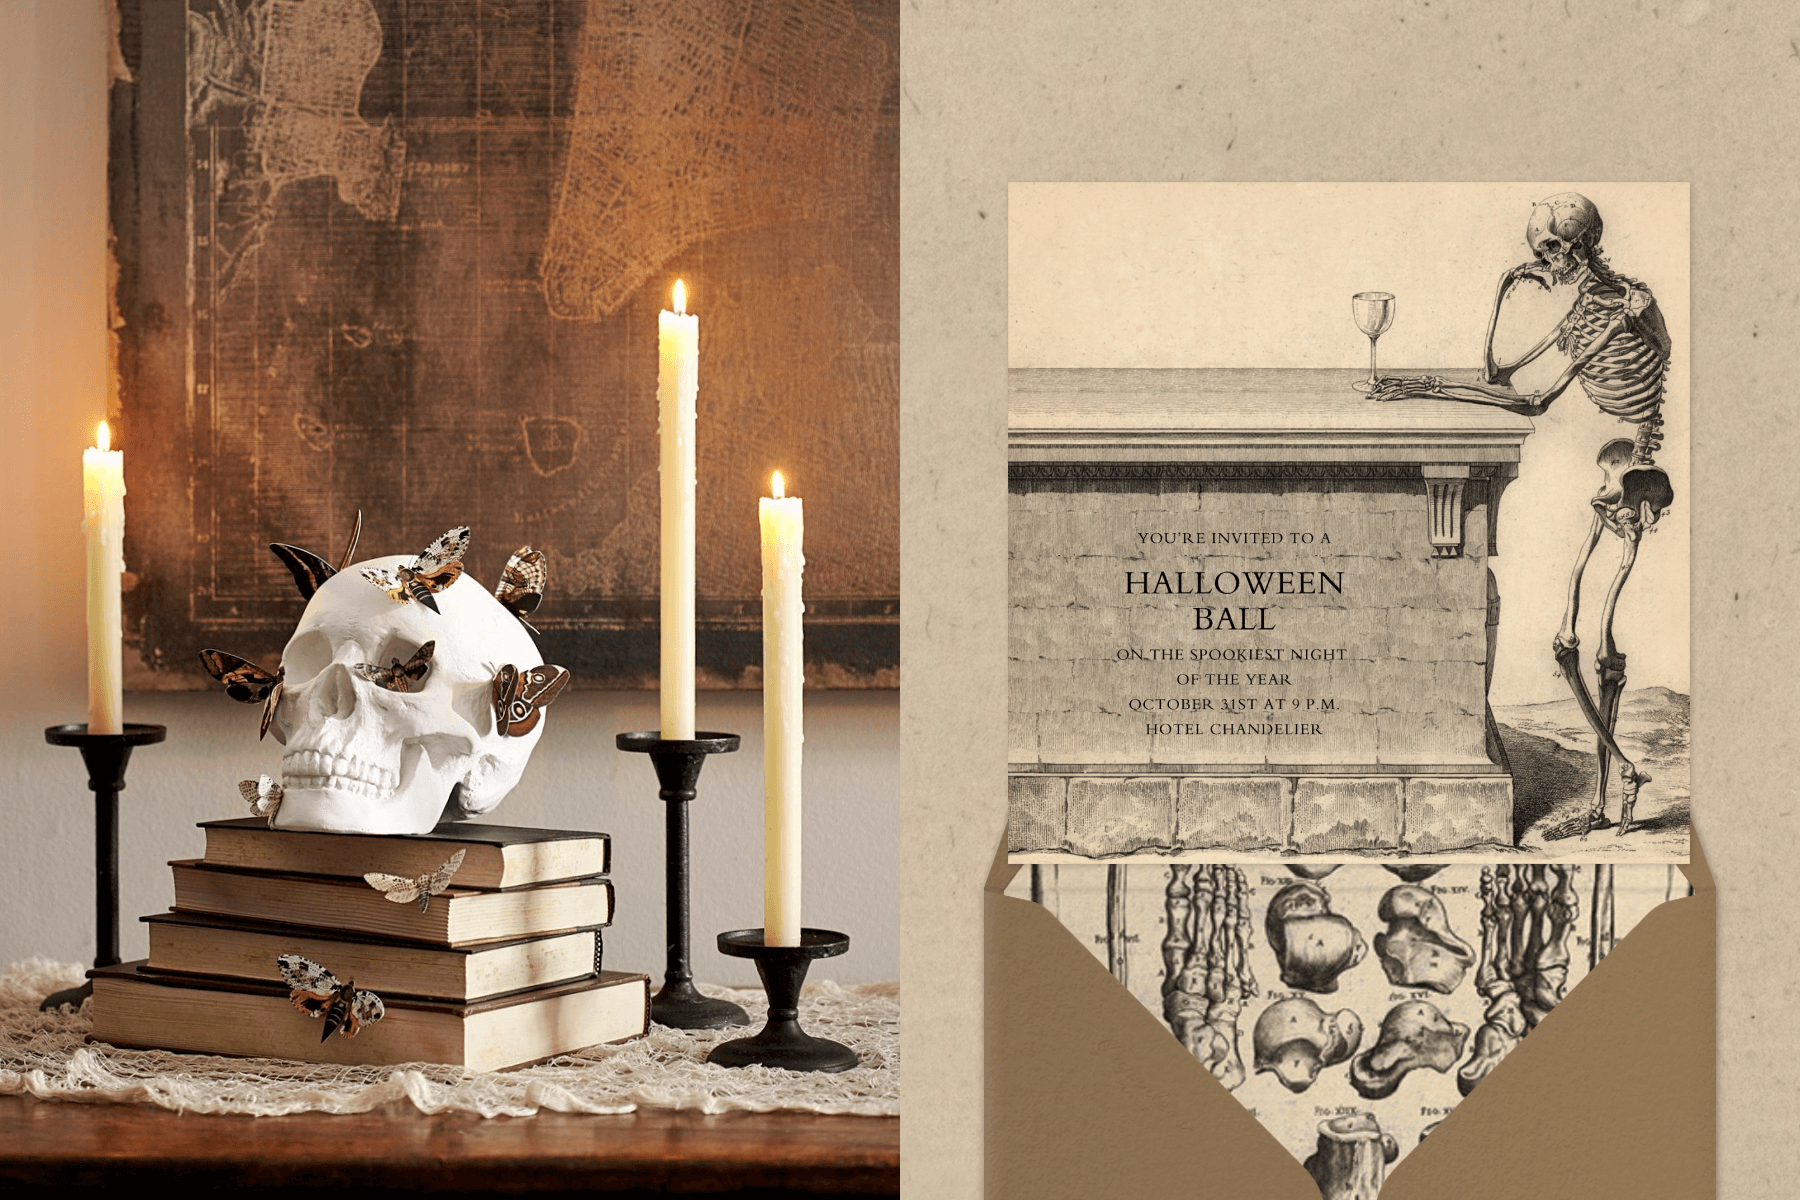 Left: A skull with butterflies on it sits atop a stack of books with three taper candles nearby. Right: A Halloween Ball invitation shows a black and white sketch of a skeleton with a wine glass leaning against a tomb.